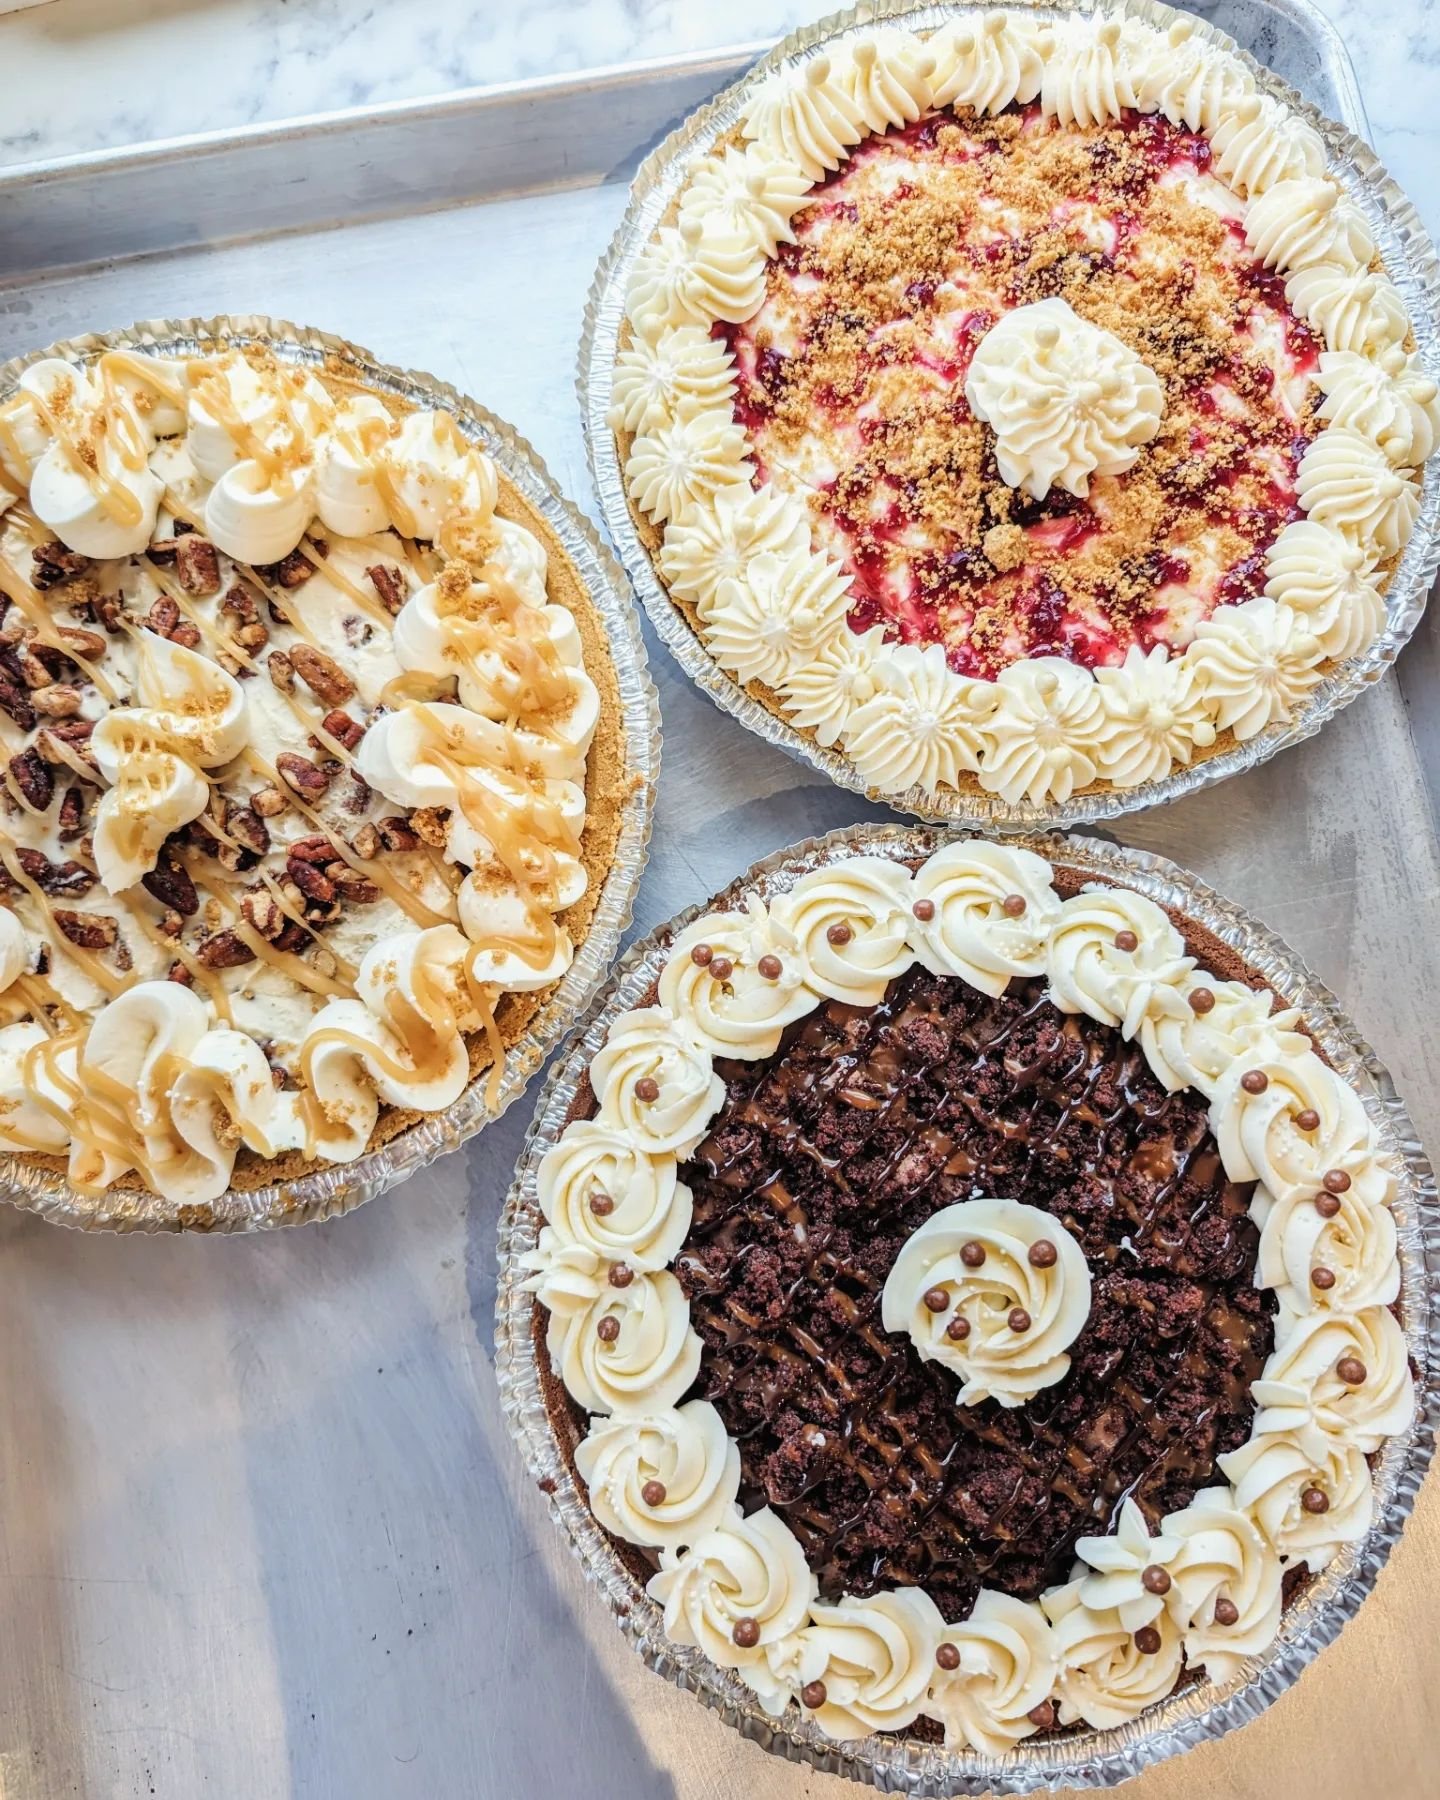 3 ice cream pies on the menu for Mother's Day!  Orders close TOMORROW, 9P.
&bull; RASPBERRY CHEESECAKE ICE CREAM PIE - graham crust, layers of cheesecake ice cream + house raspberry jam, graham crumble. Decorated with vanilla buttercream &amp; white 